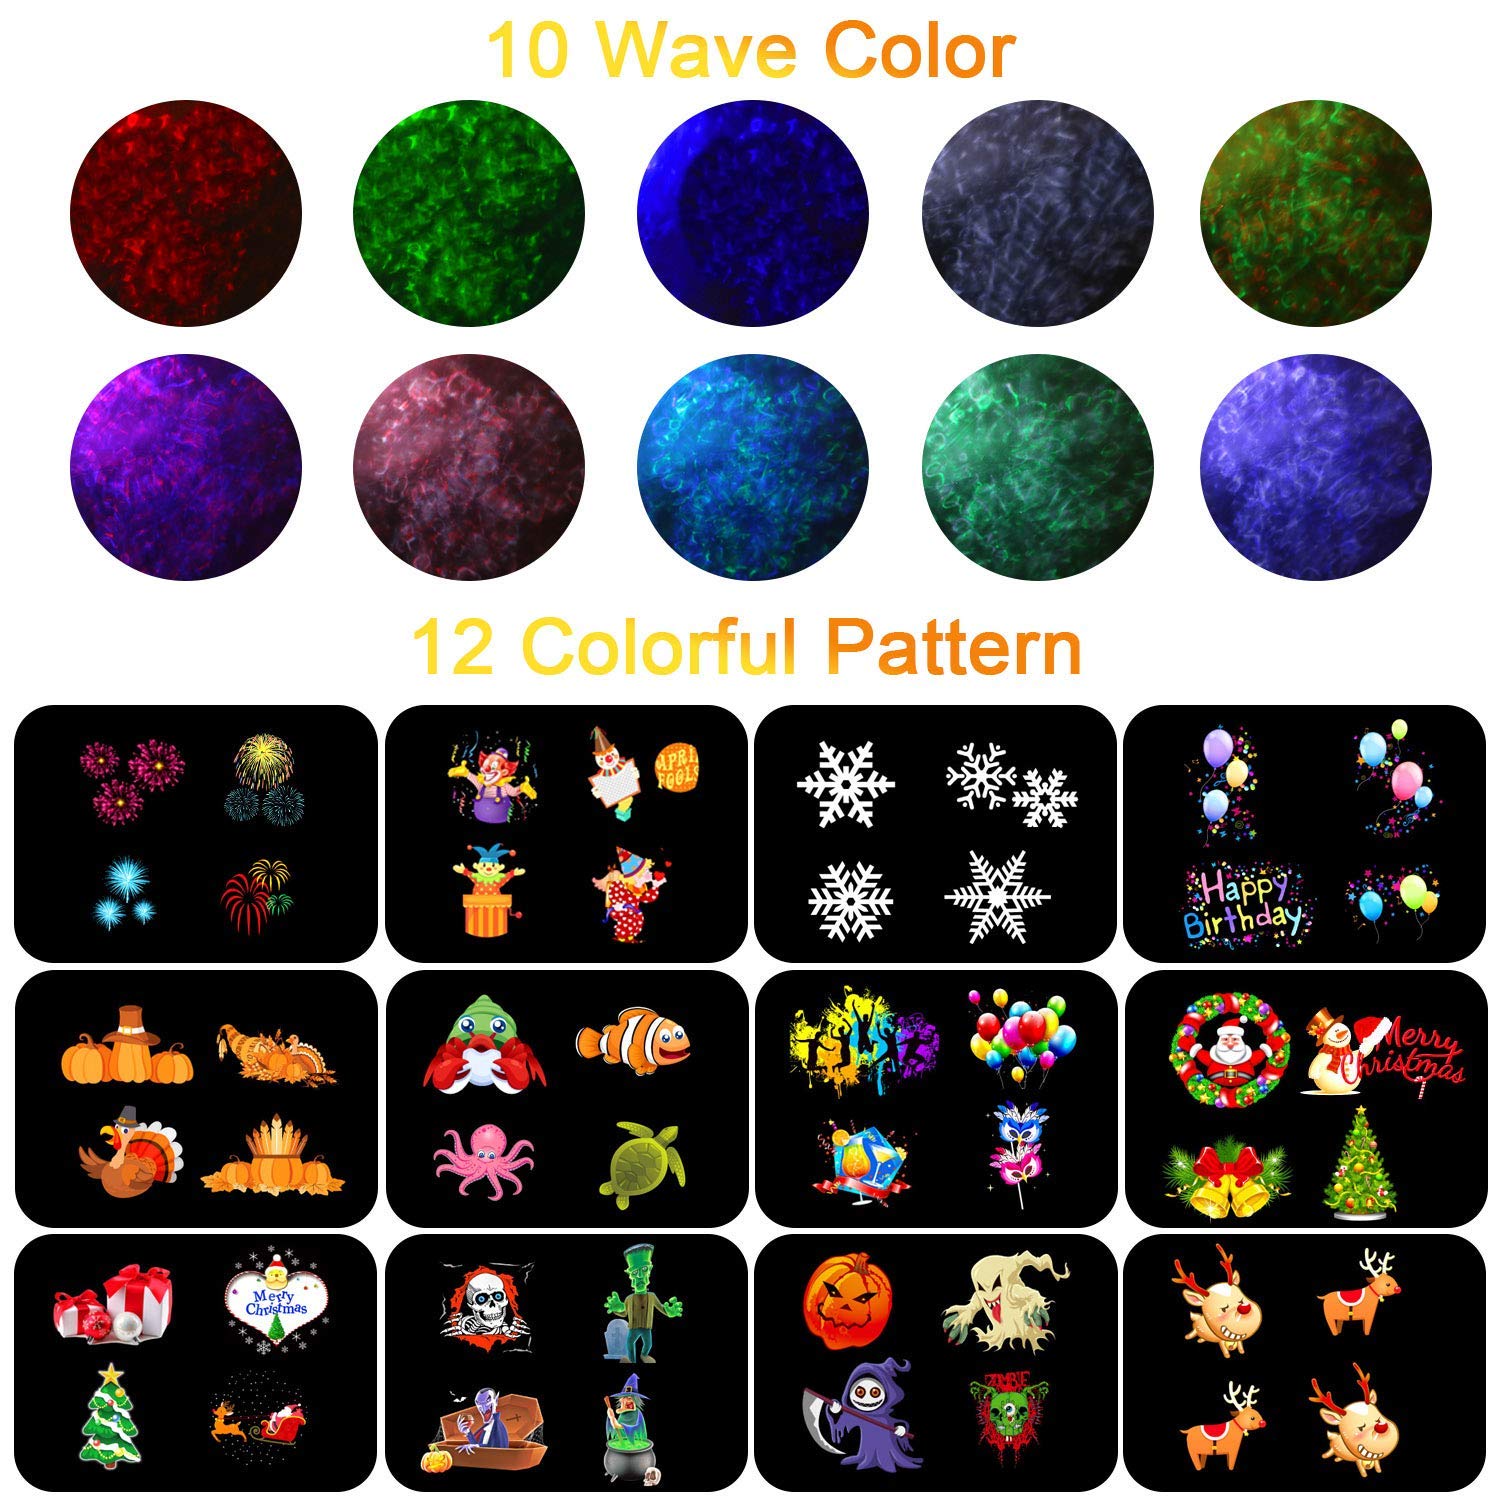 10 wave color and 12 colorful pattern